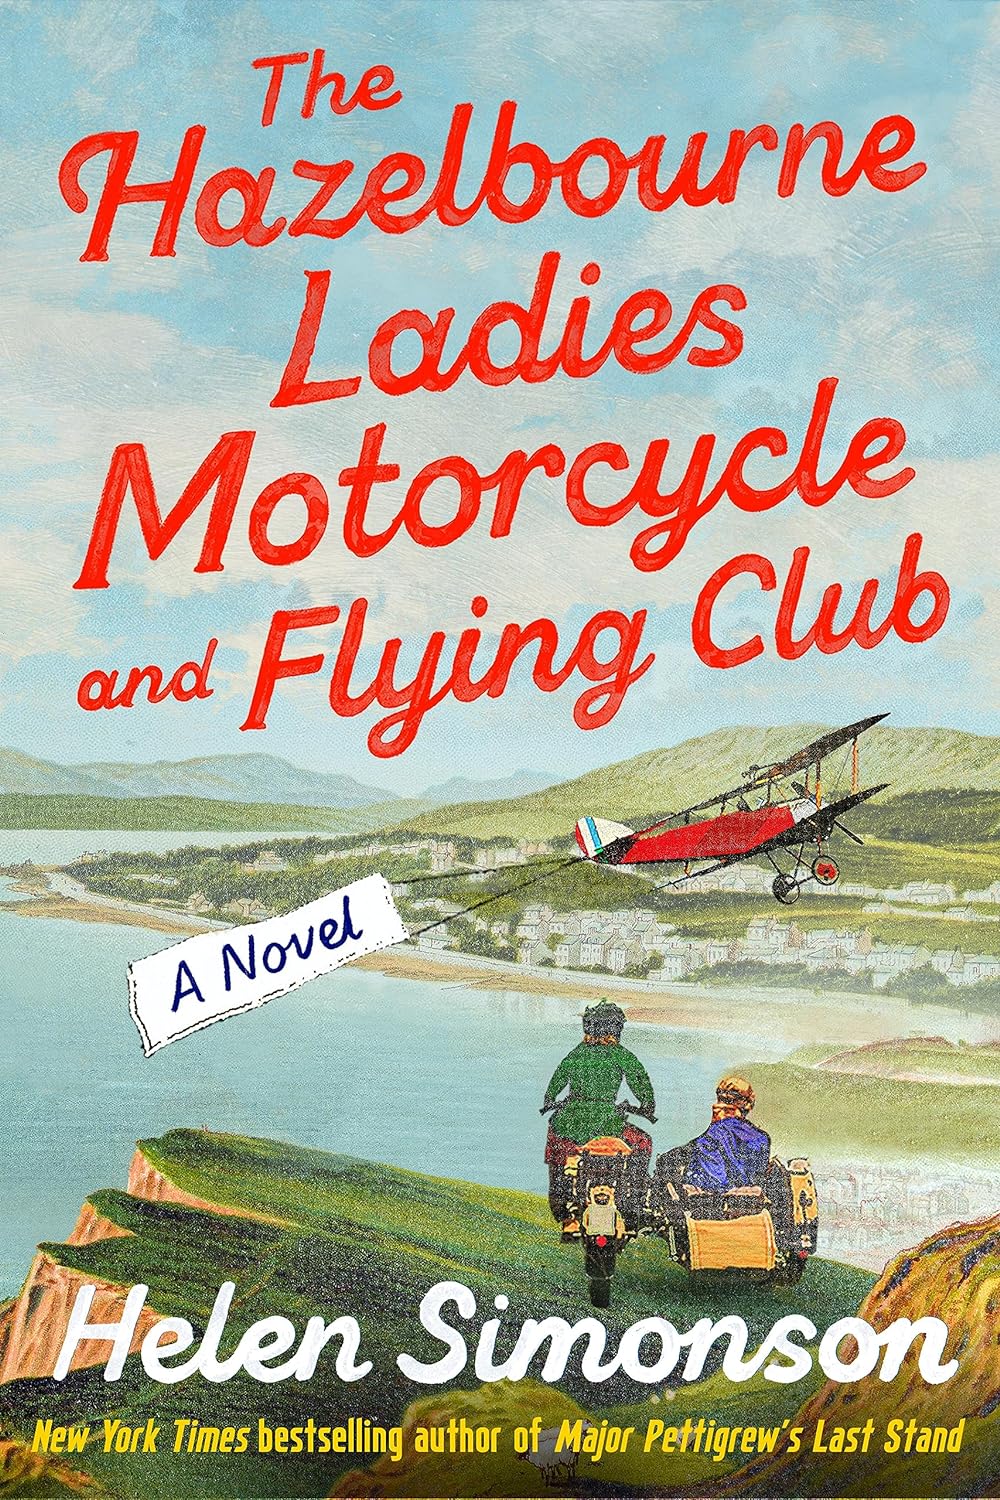 Image for "The Hazelbourne Ladies Motorcycle and Flying Club"